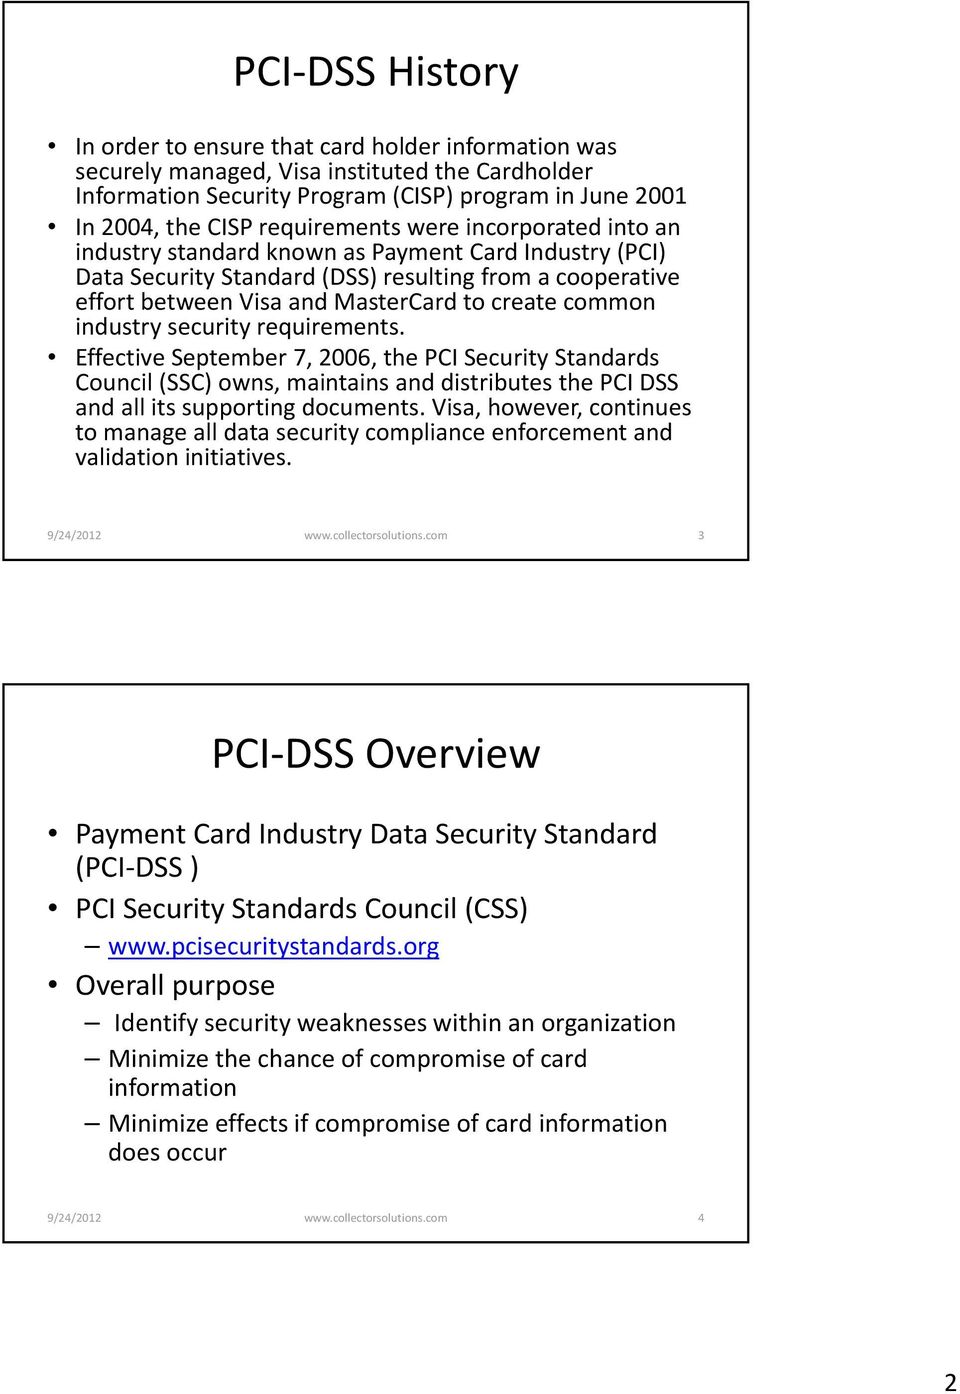 common industry security requirements. Effective September 7, 2006, the PCI Security Standards Council (SSC) owns, maintains and distributes the PCI DSS and all its supporting documents.